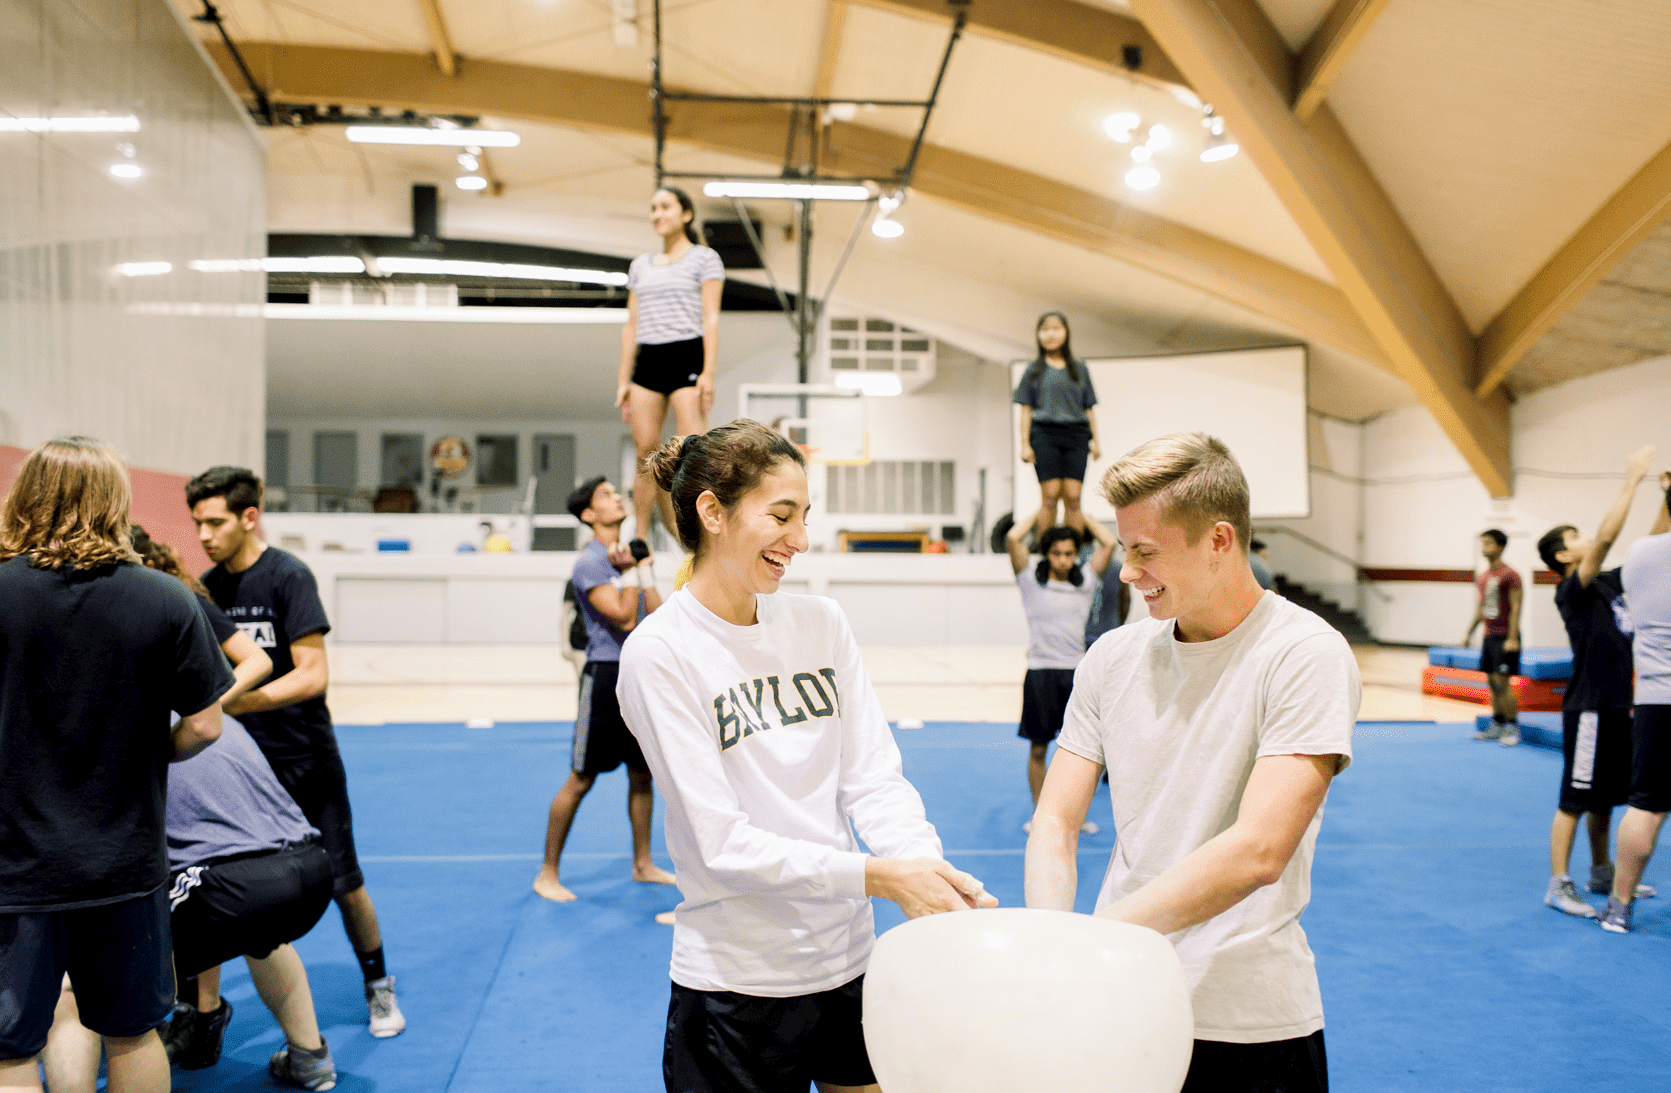 In the gymnasium, the SWAT team practices in the background while we focus on two of the members applying chalk on their hands preparing to practice